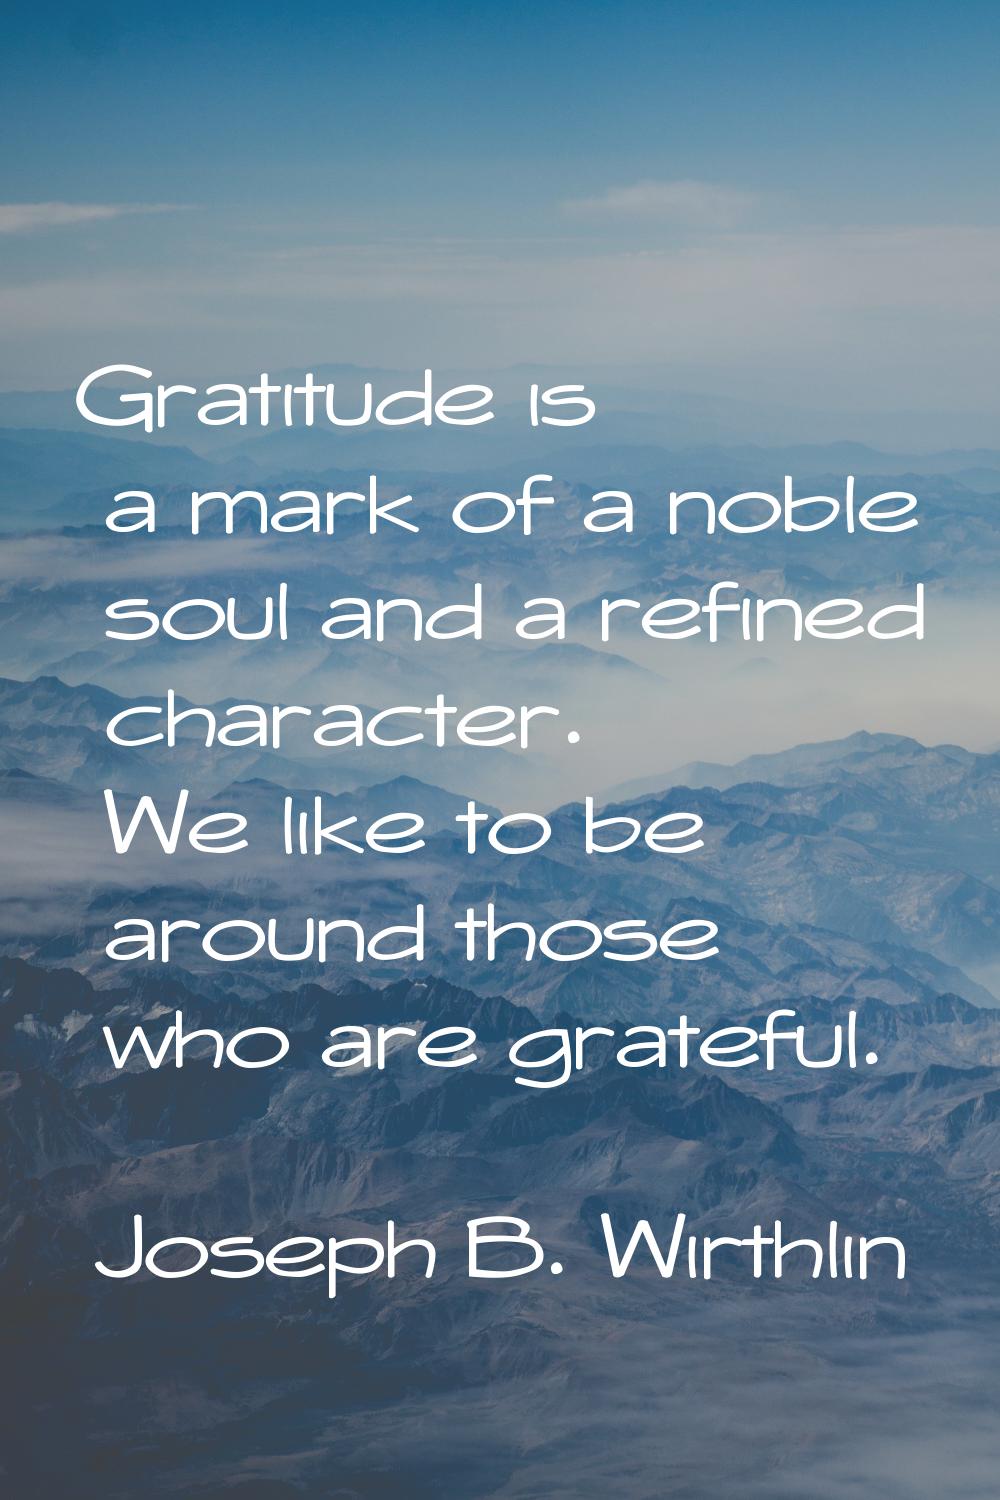 Gratitude is a mark of a noble soul and a refined character. We like to be around those who are gra